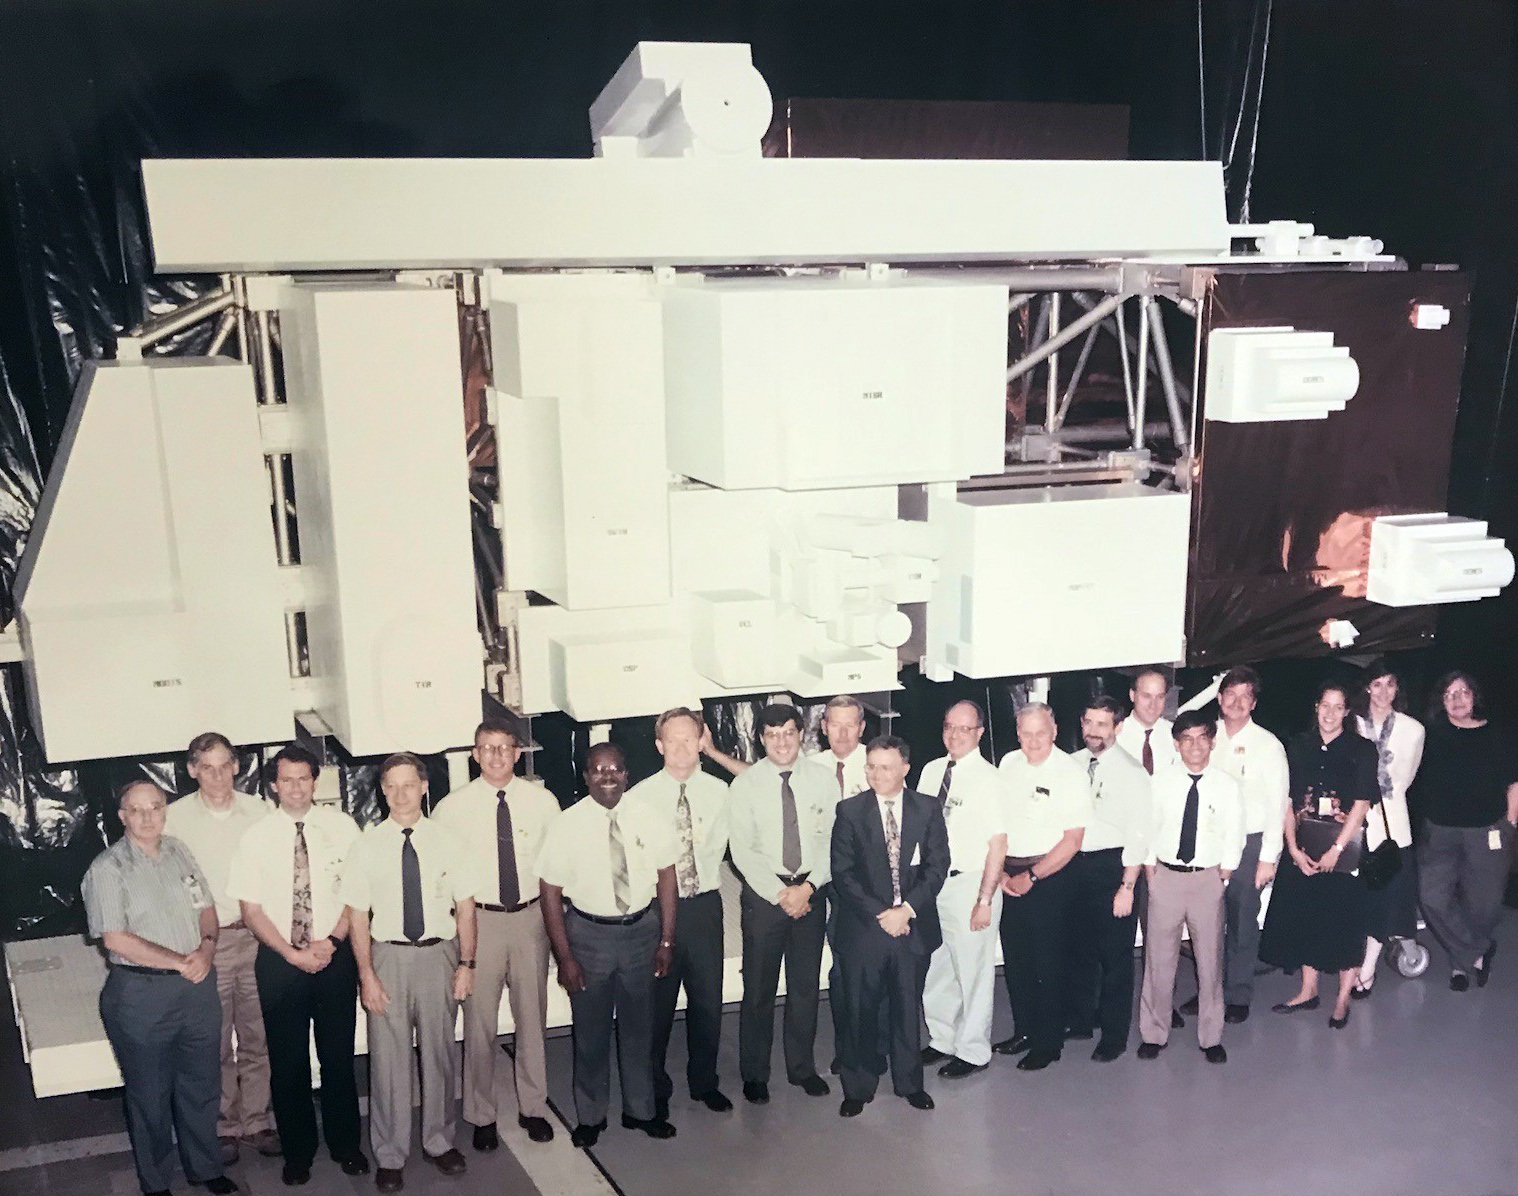 NASA scientists, engineers and designers pose for a group photo in front of the Terra model.